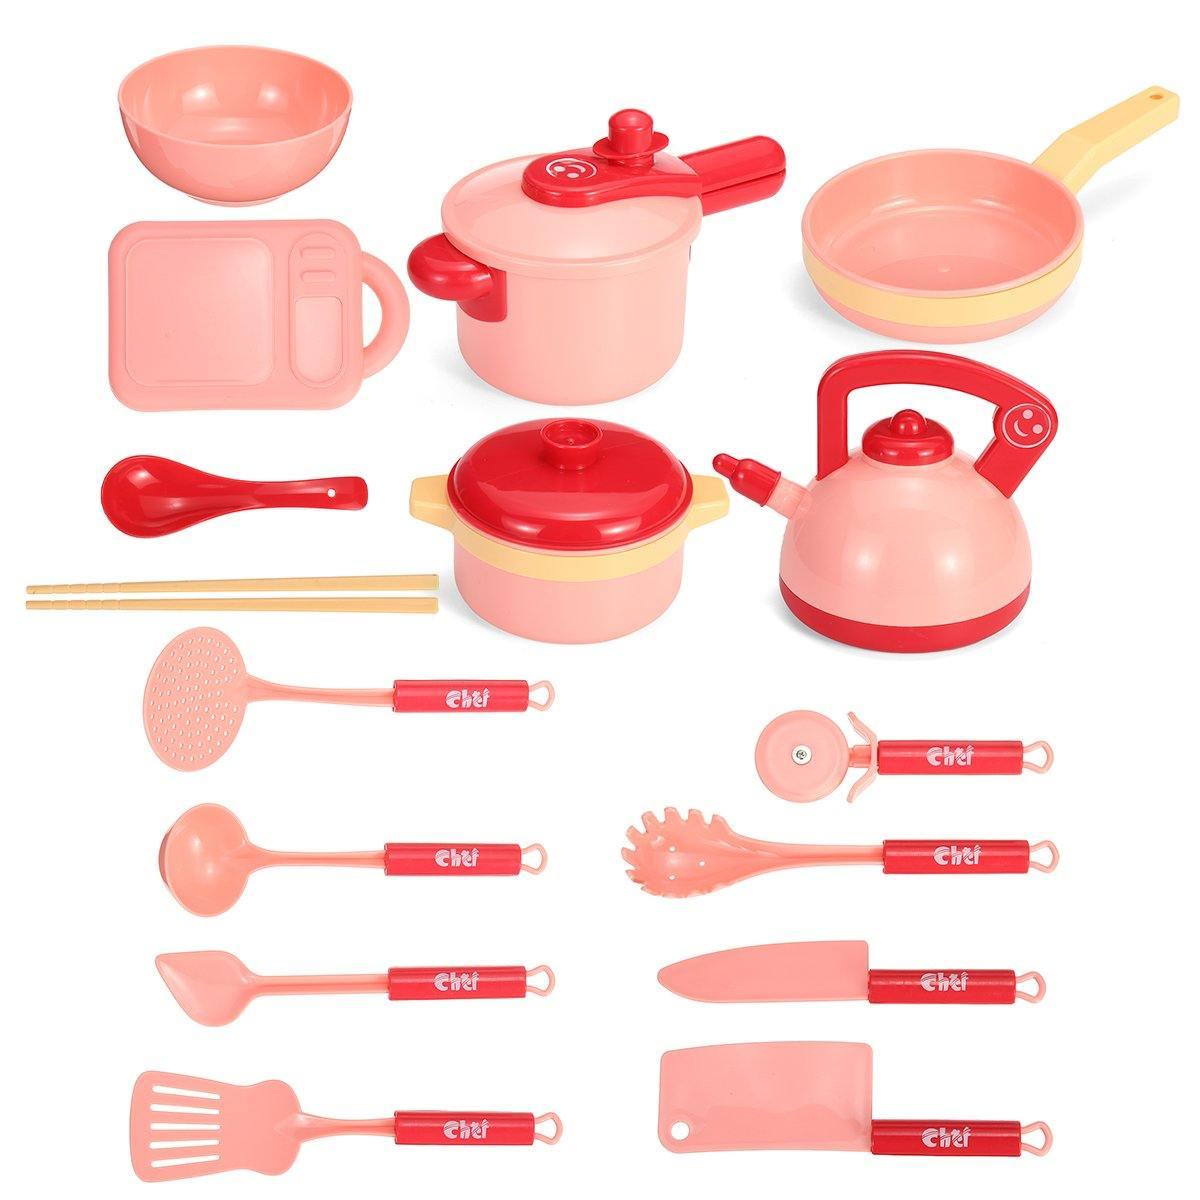 ezy2find kitchen toys A 16Pcs Simulation Kitchen Cooking Play Role playing Set Toys Practical Skills for Children Gift